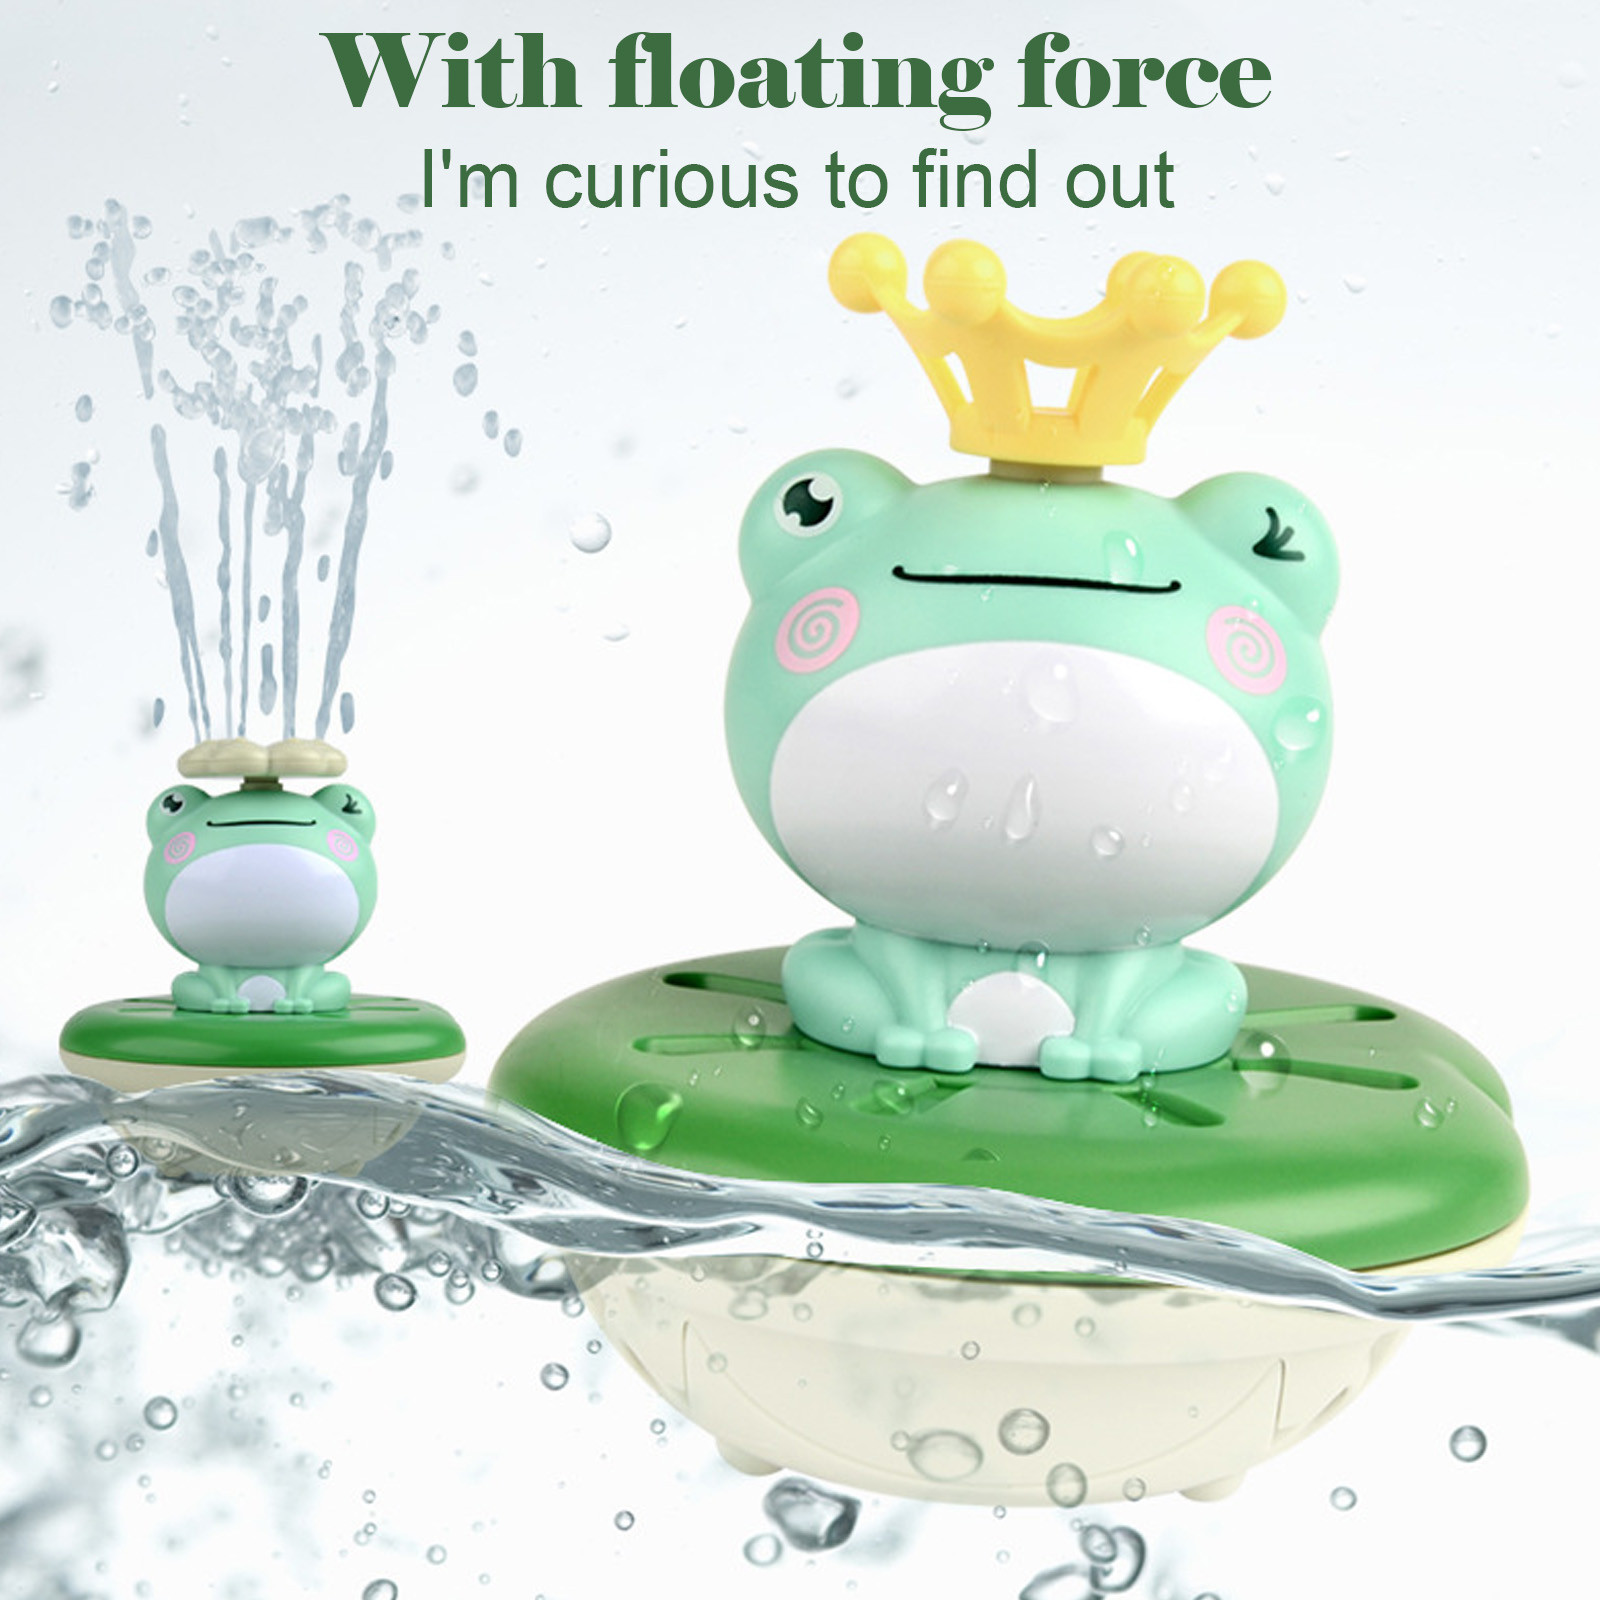 Early Christmas Sale 48% OFF -Baby Bath Frog Toy(BUY 3 FREE SHIPPING）